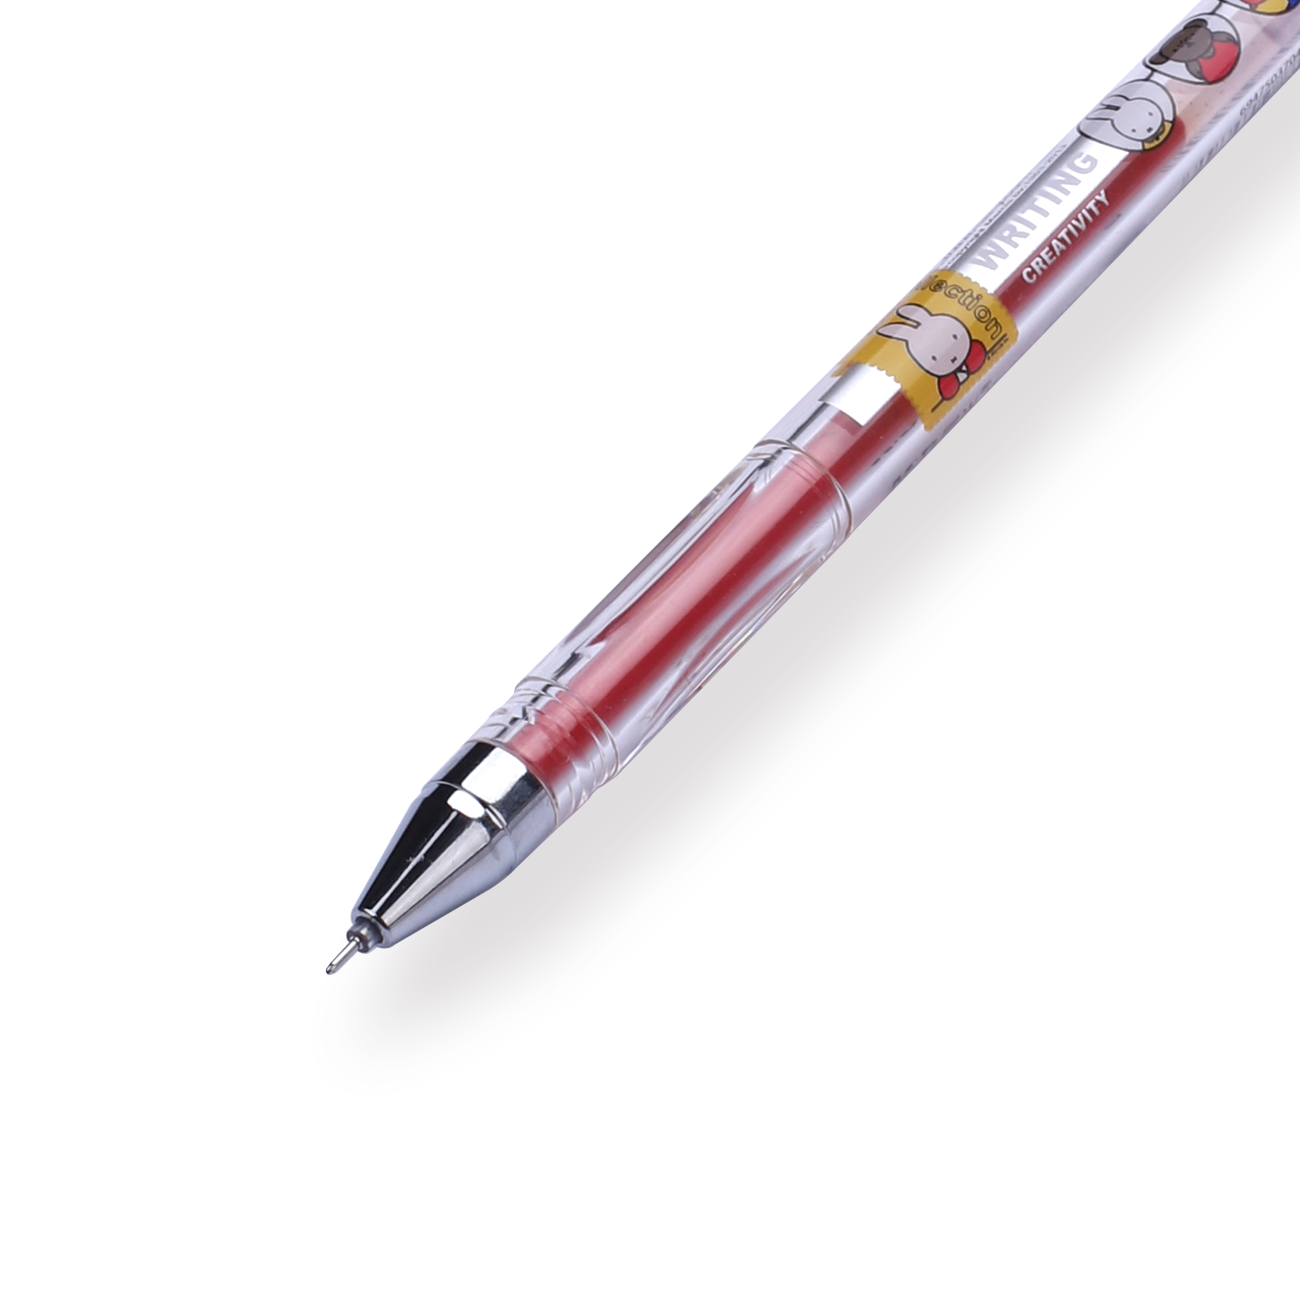 Miffy Limited Edition Gel Pen 0.38mm - Red - Stationery Pal